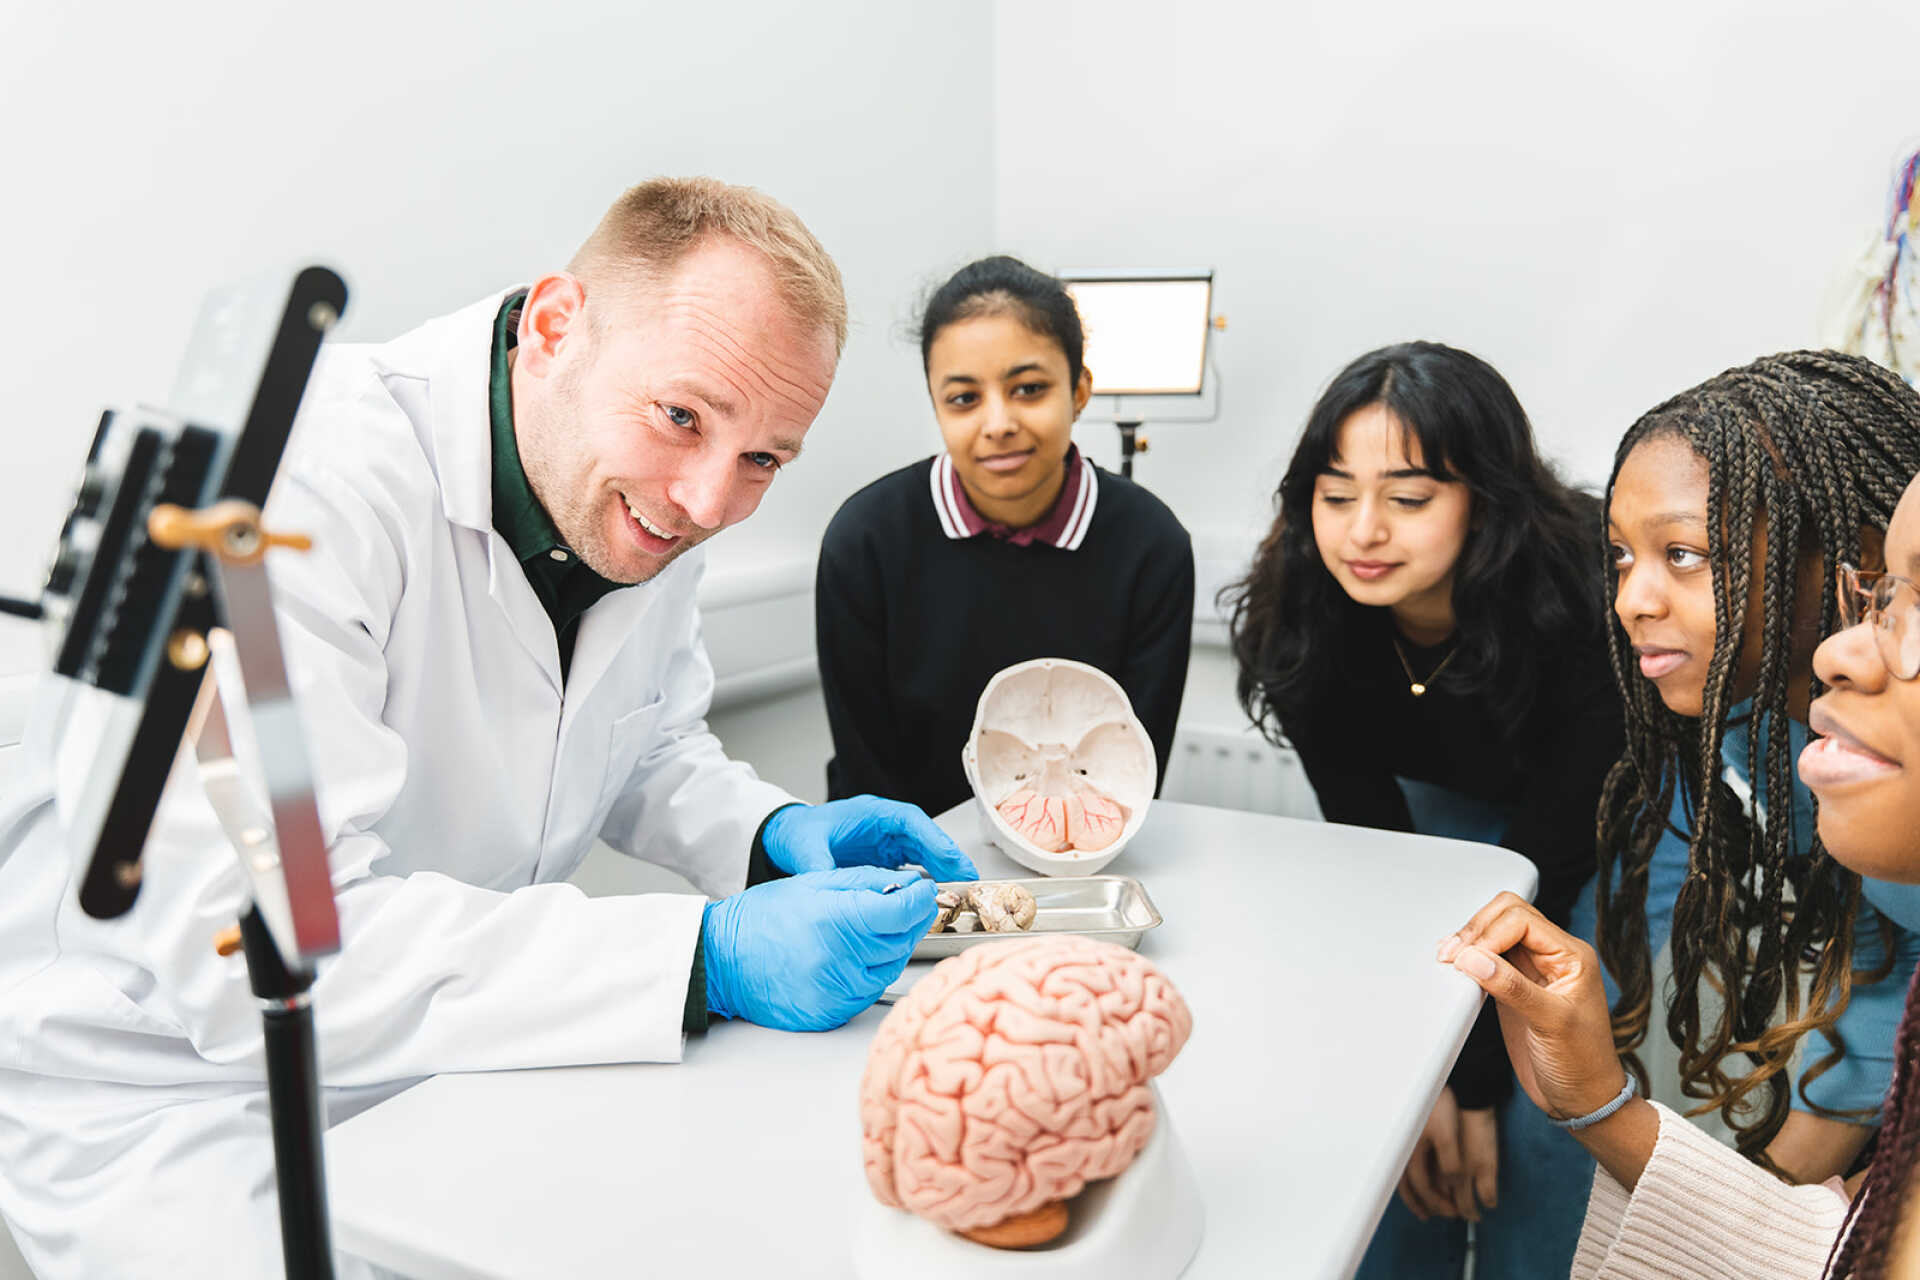 Psychology lecturer dissecting a sheep brain's with students.